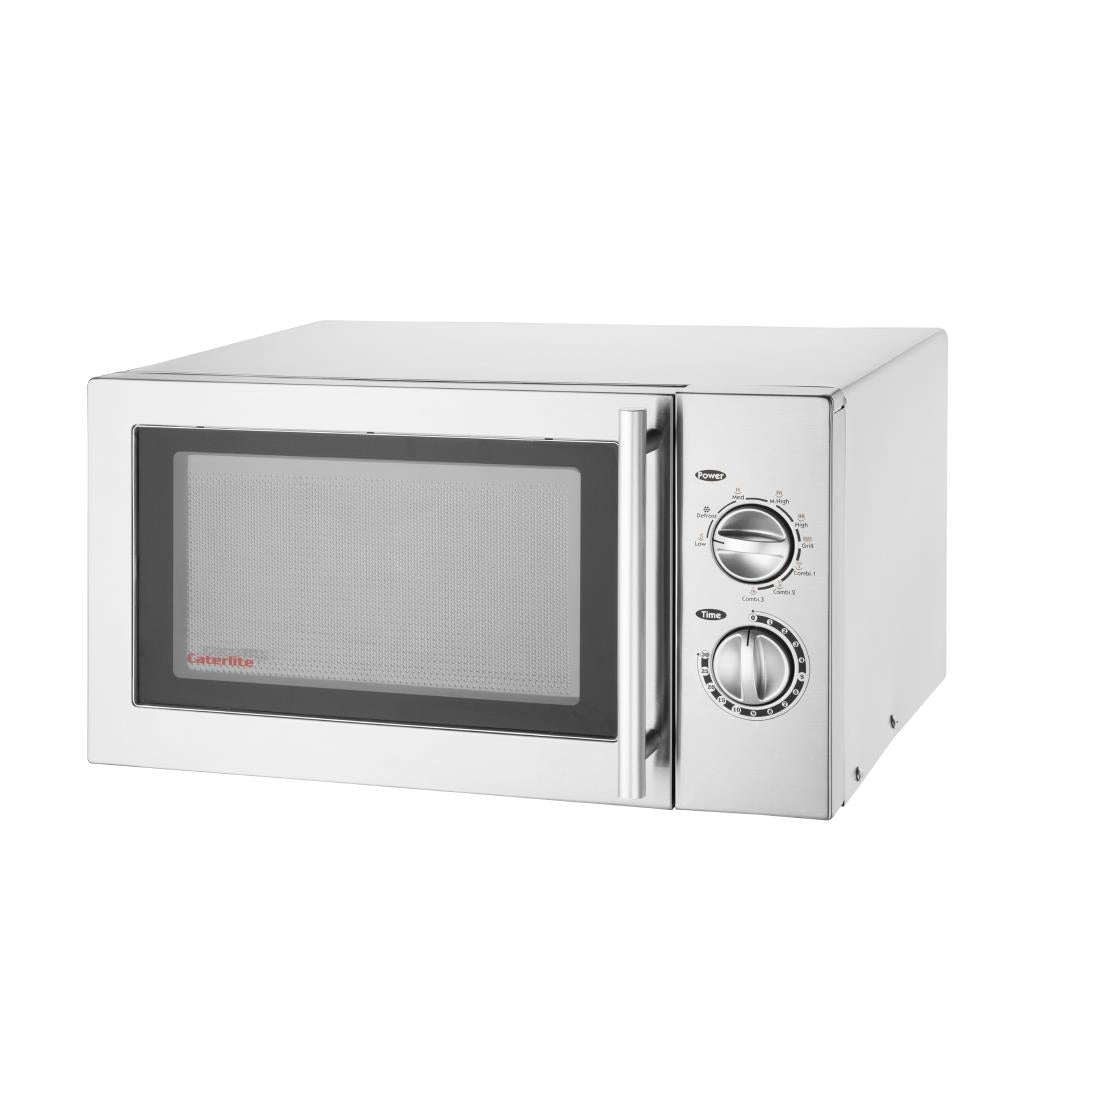 CK018 Caterlite Manual Microwave and Grill 23Ltr 900W